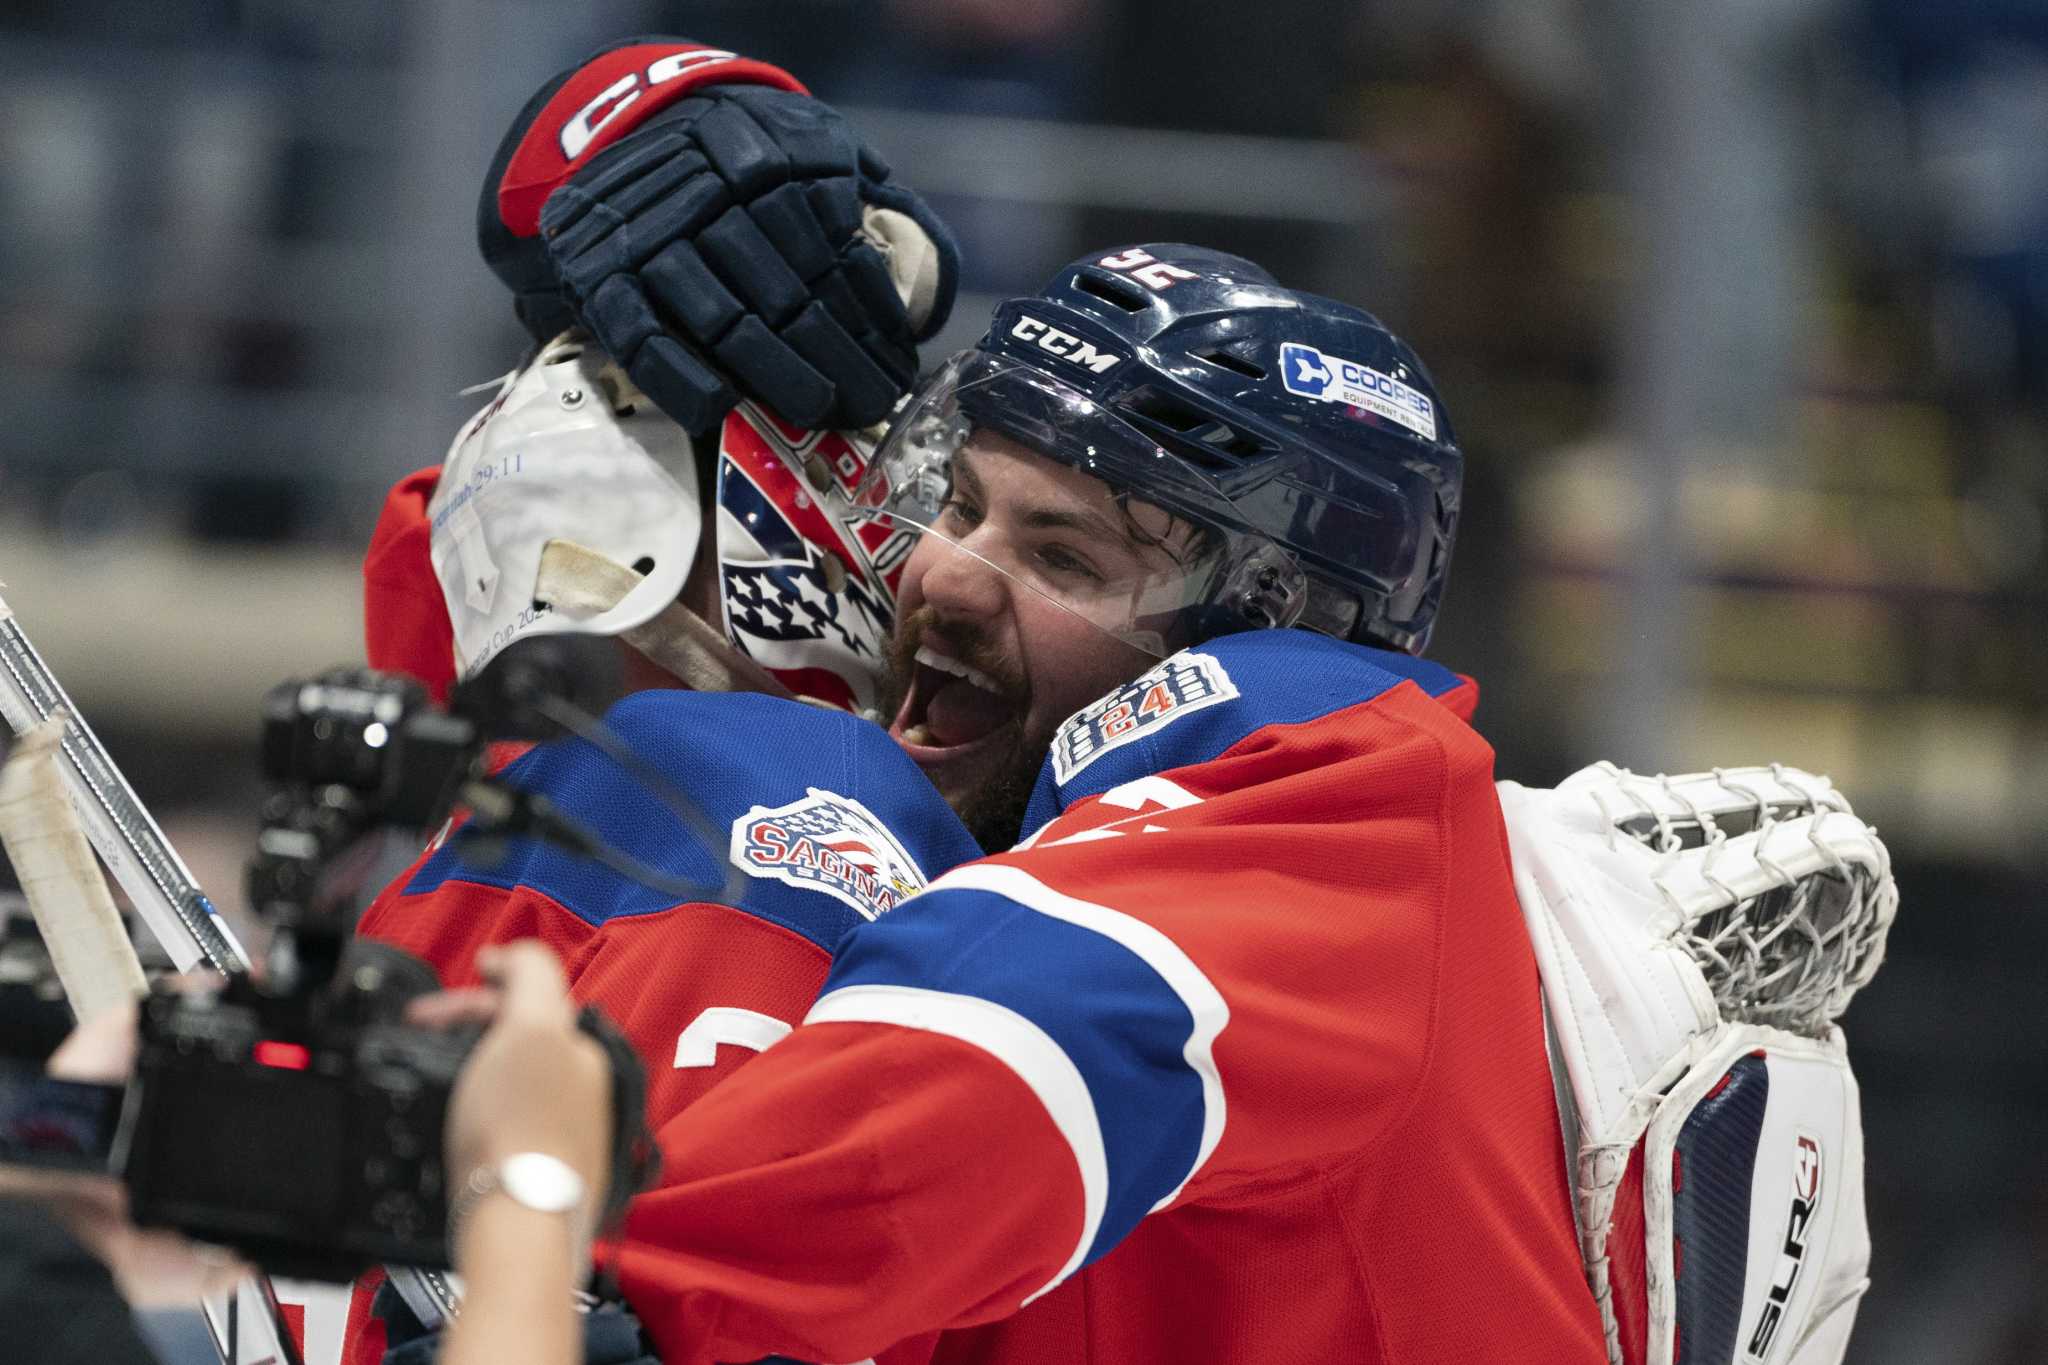 Host Saginaw opens the Memorial Cup with a 5-4 victory over Moose Jaw